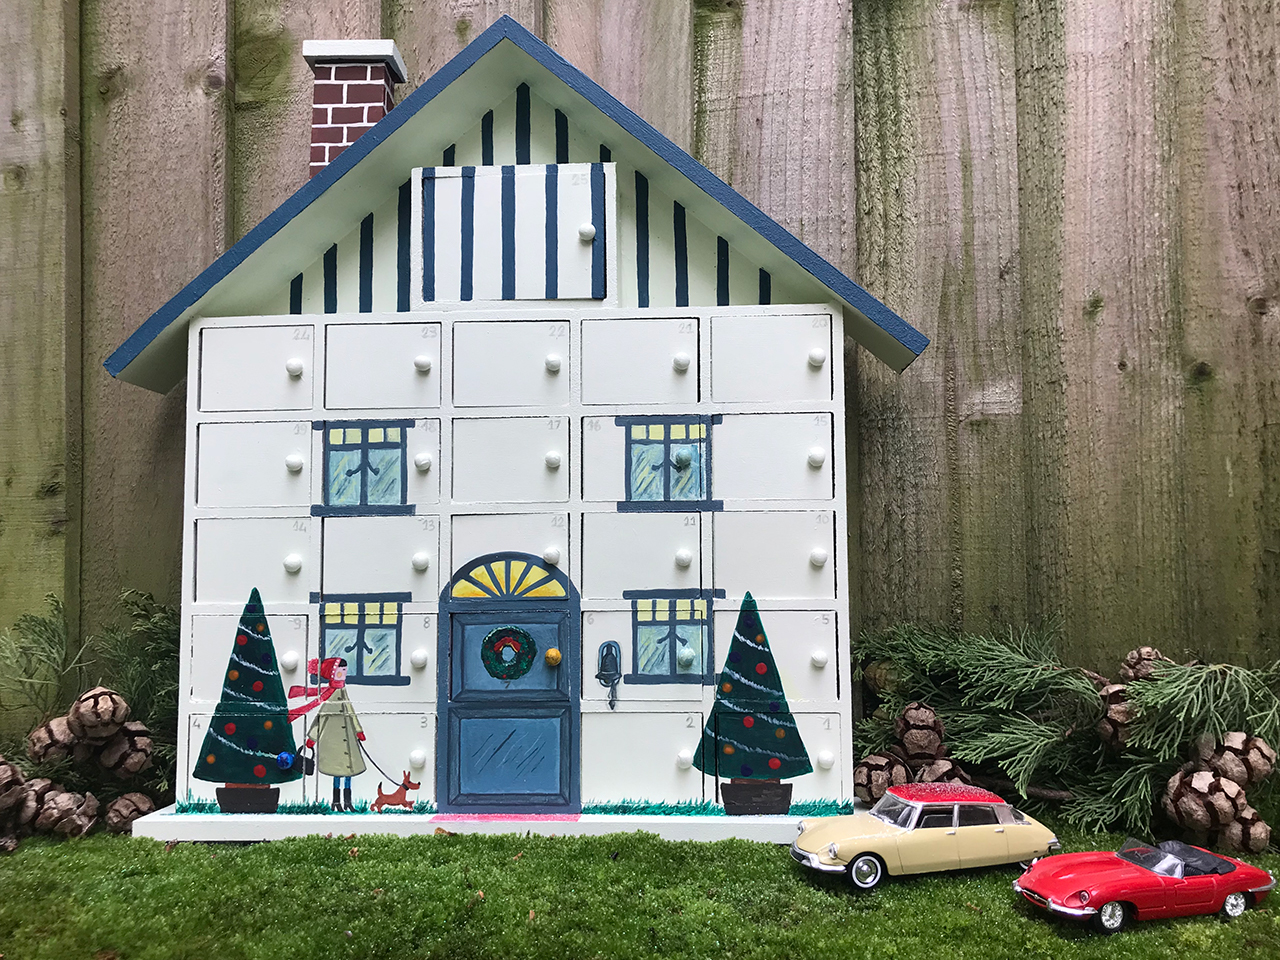 My painted wooden advent house calendar